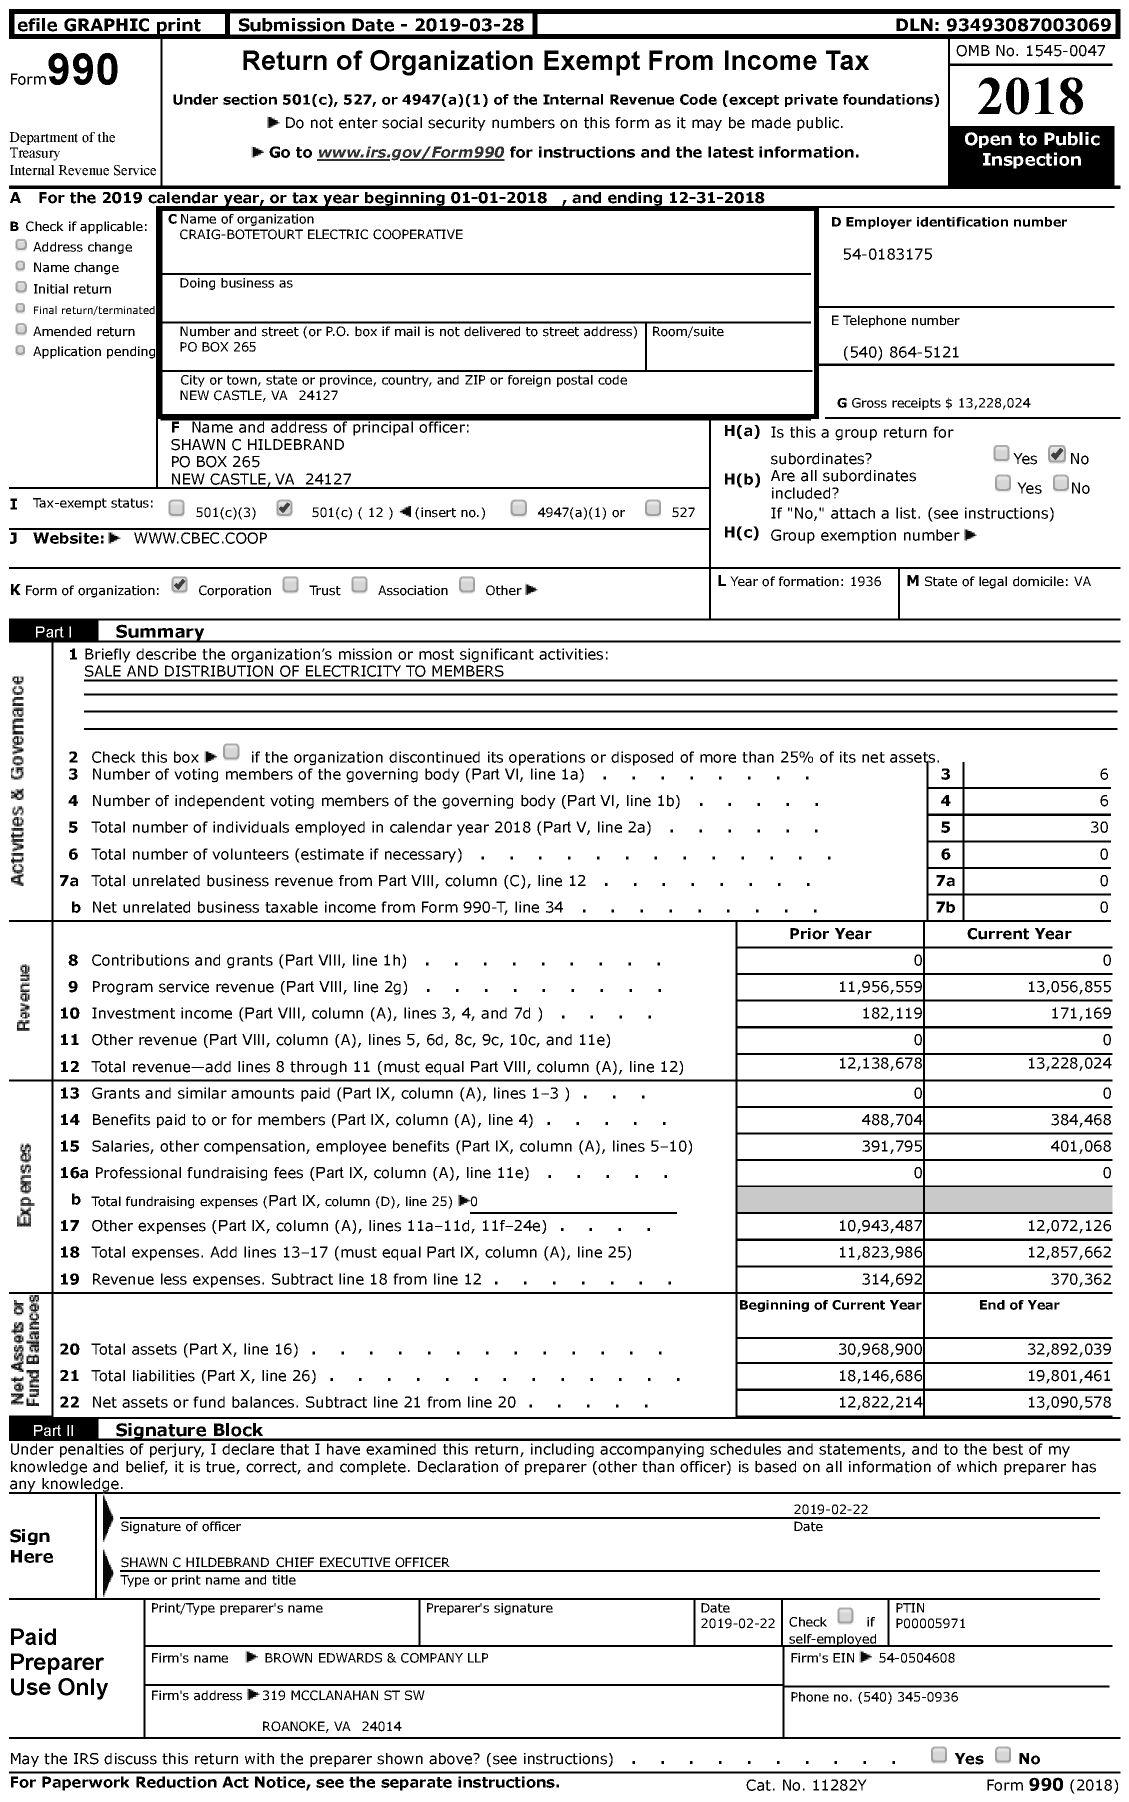 Image of first page of 2018 Form 990 for Craig-Botetourt Electric Cooperative